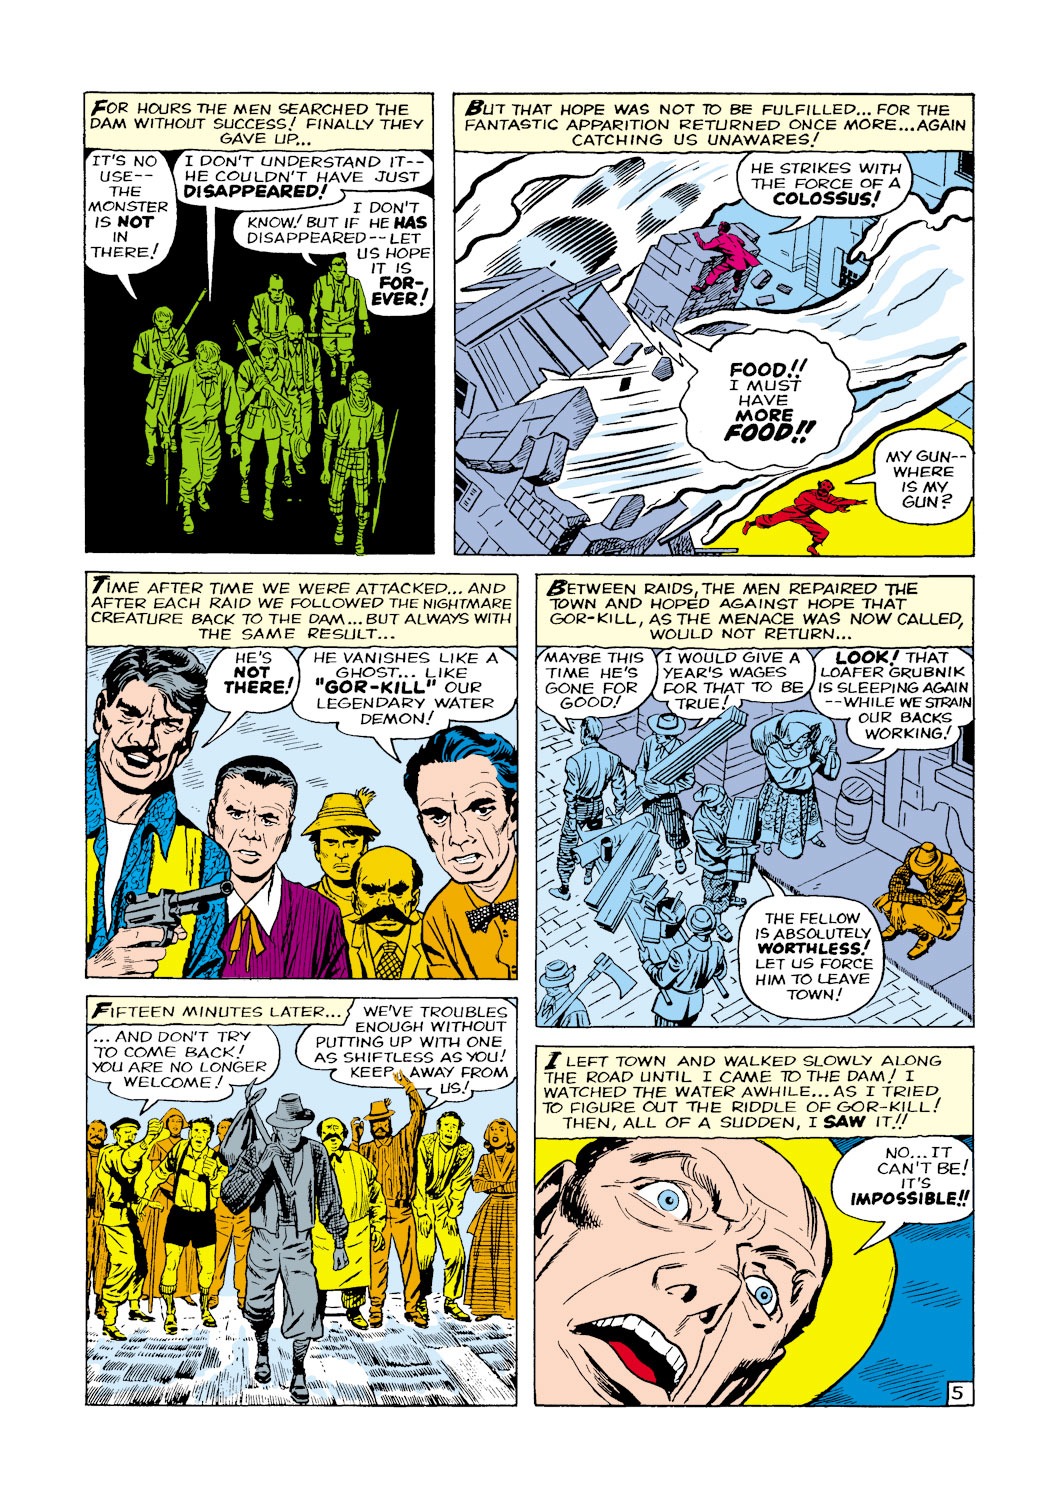 Tales of Suspense (1959) 12 Page 5